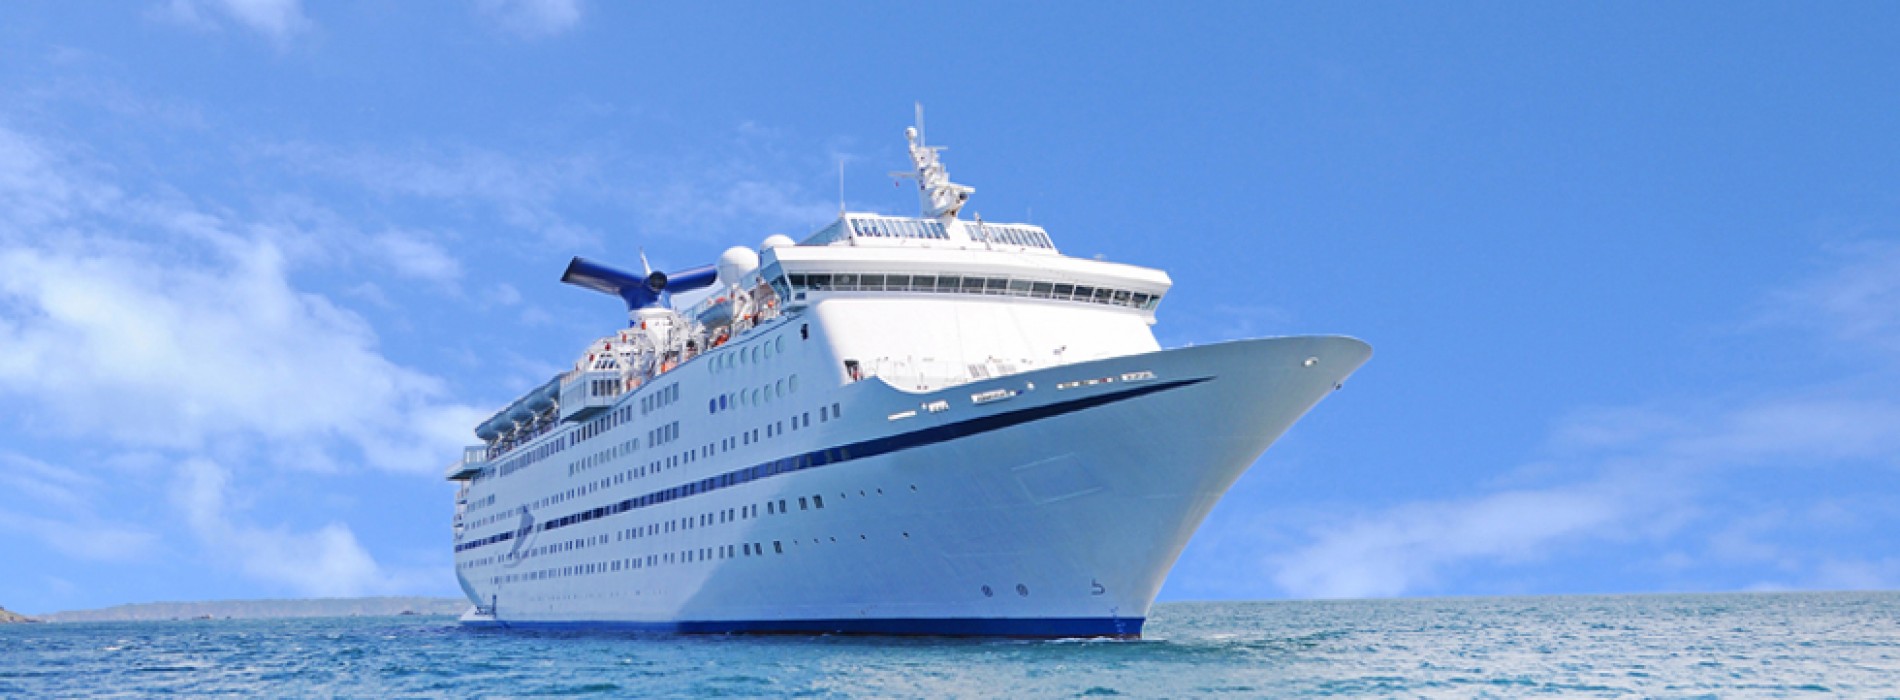 India fast emerging as top destination for cruise tourism : Govt